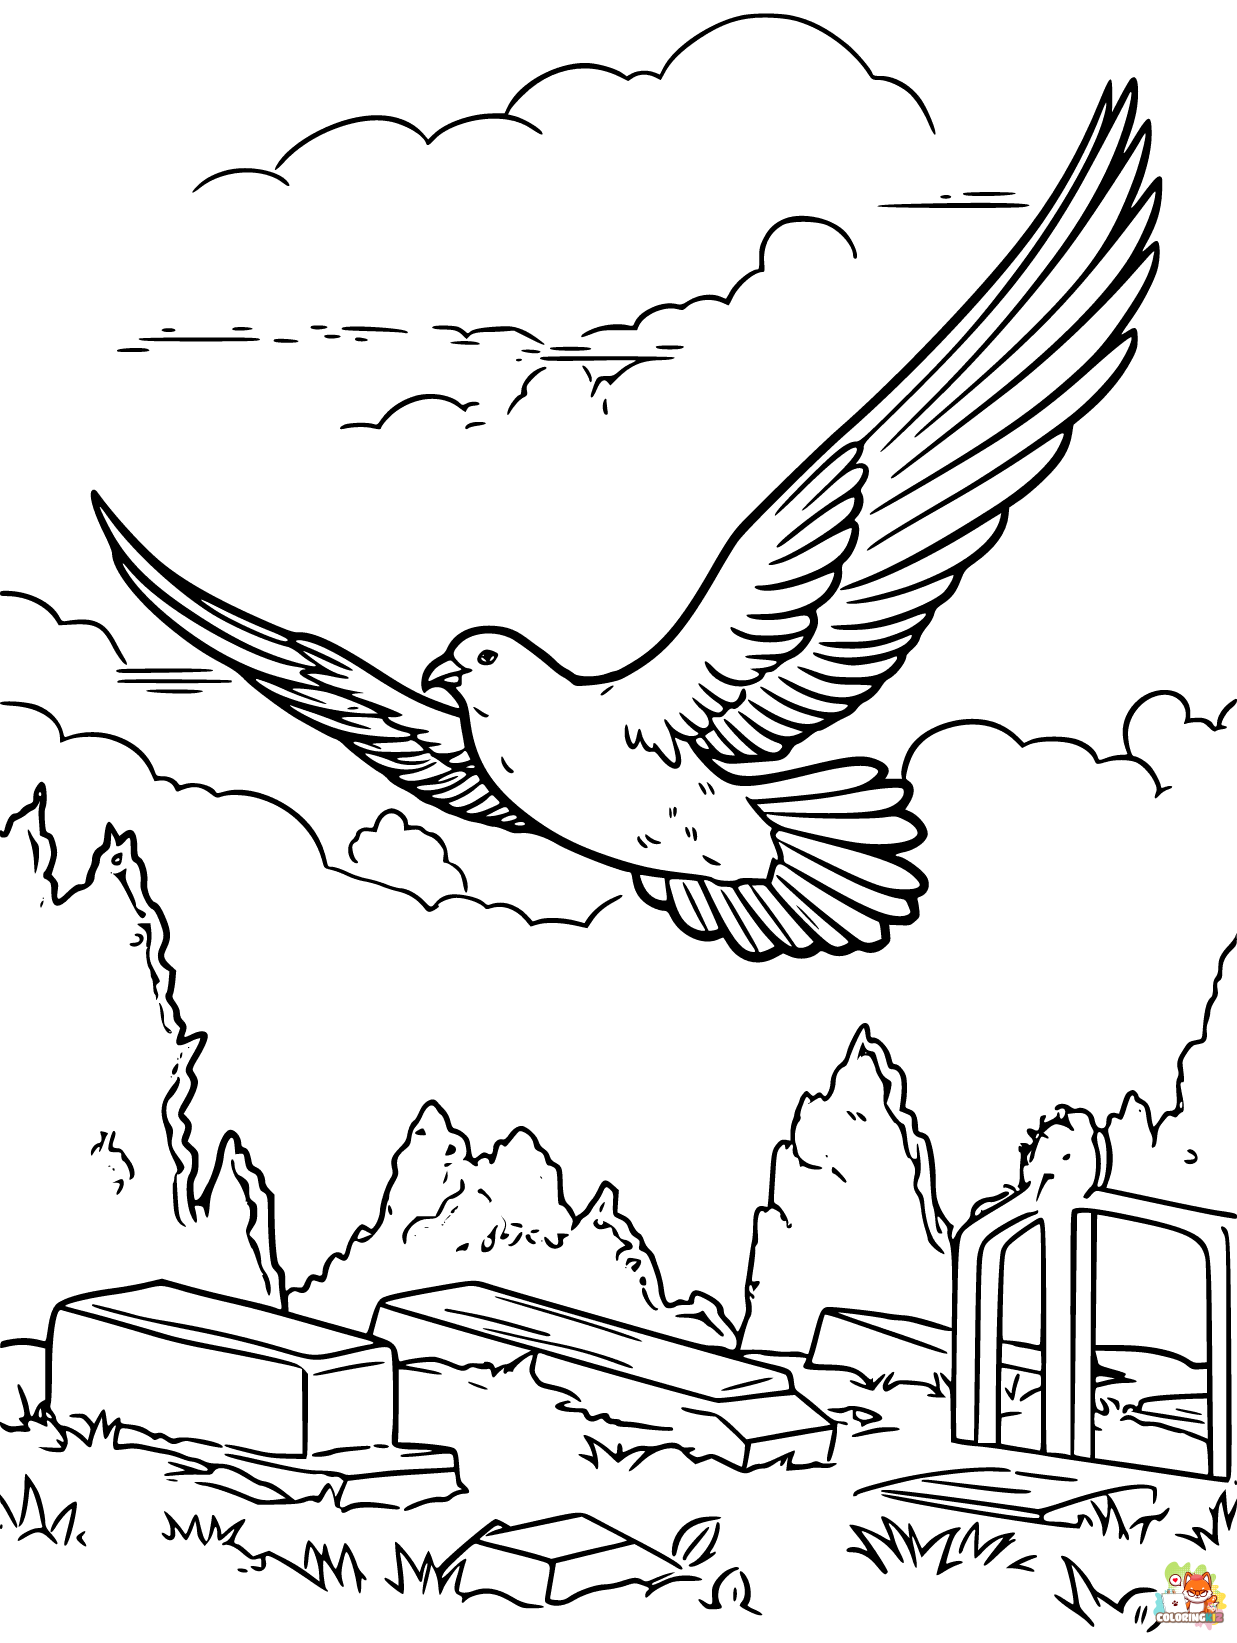 Memorial Day coloring pages printable